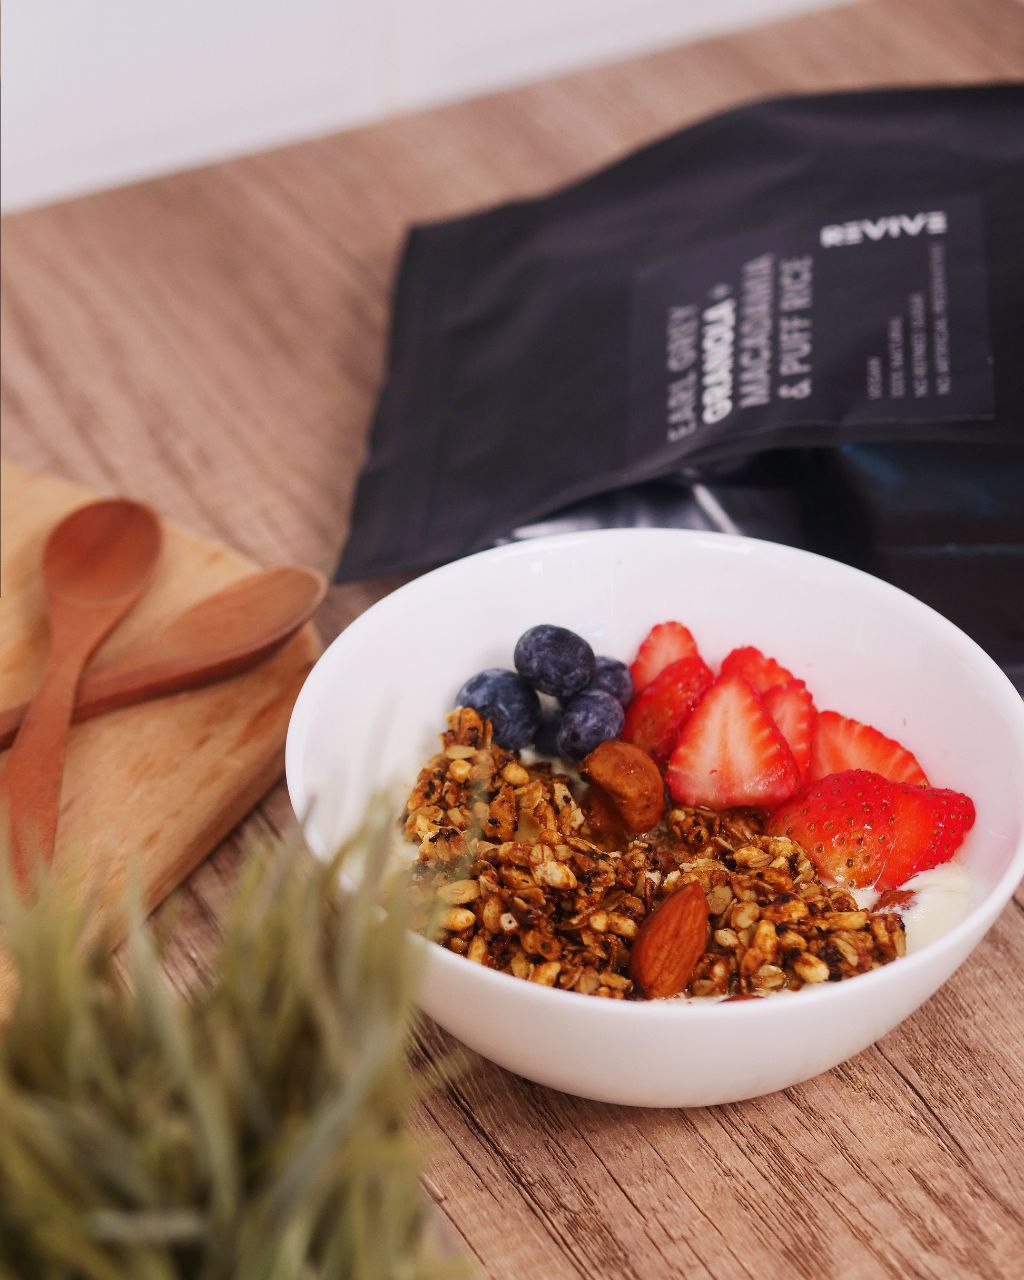 Revive - Singapore's Granola, Nut Butters and Oats for your Breakfast